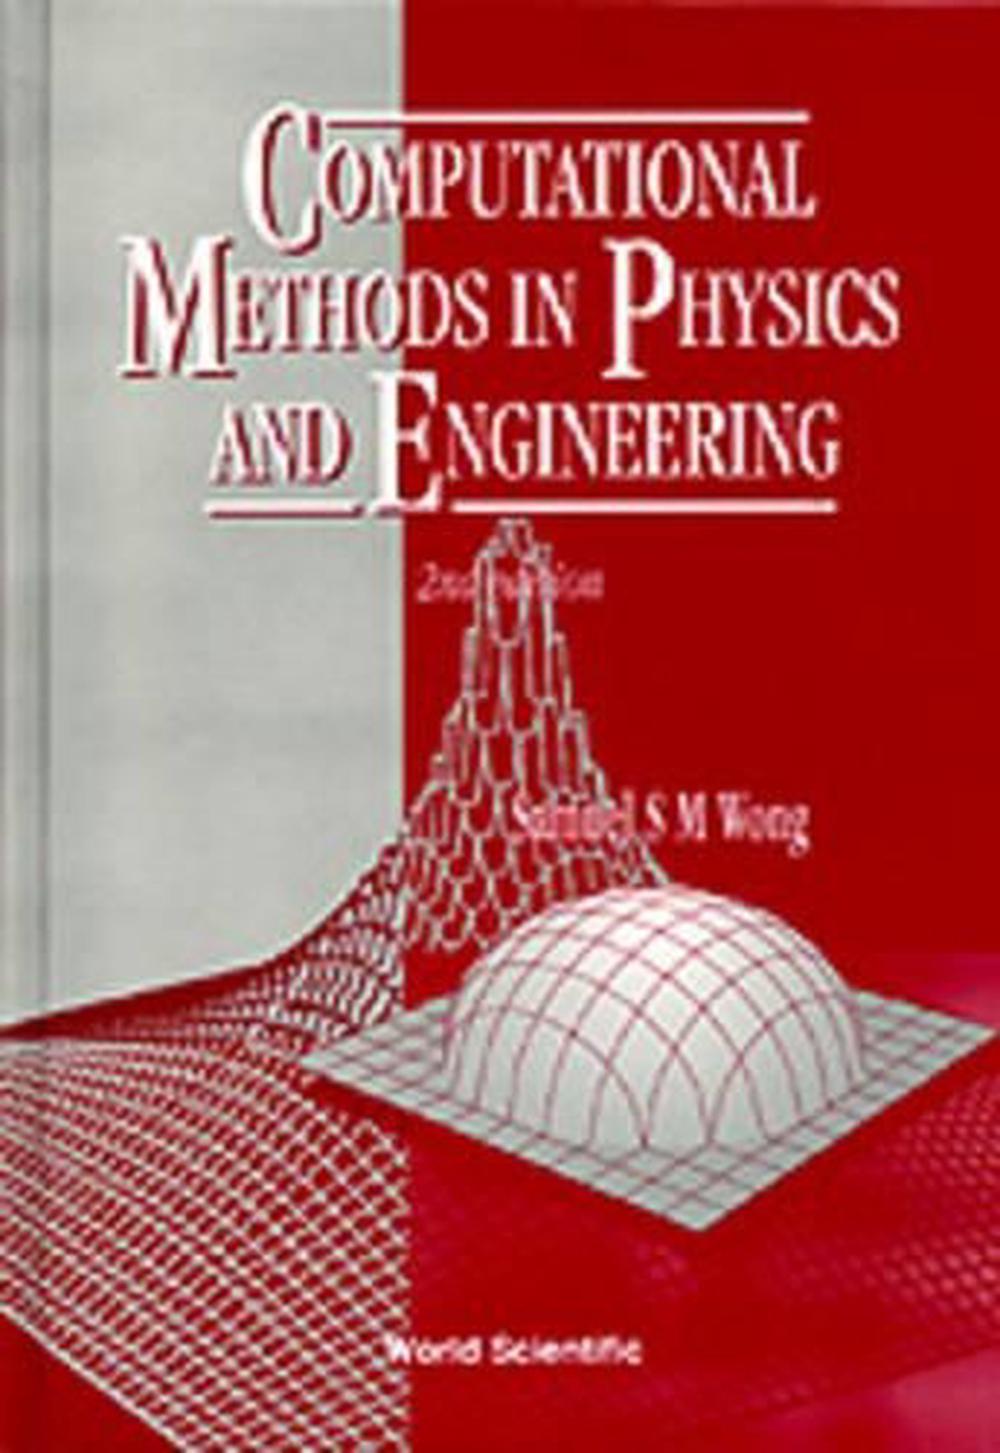 computational-methods-in-physics-and-engineering-2nd-edition-by-samuel-s-m-wo-9789810230432